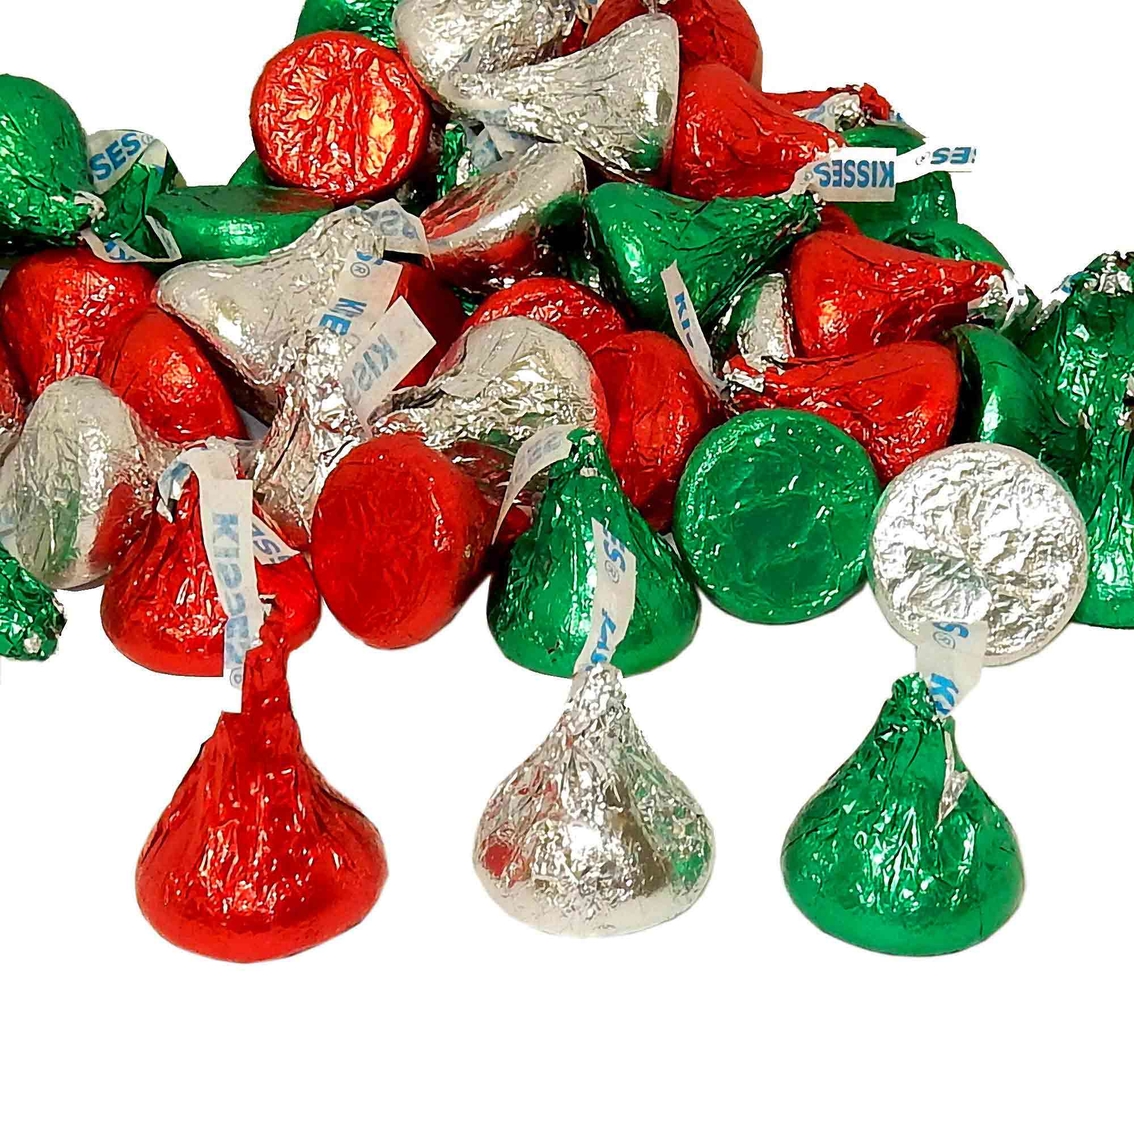 Hershey's Holiday Foil Kisses 3 Lb. Bag | Candy & Chocolate | Food ...